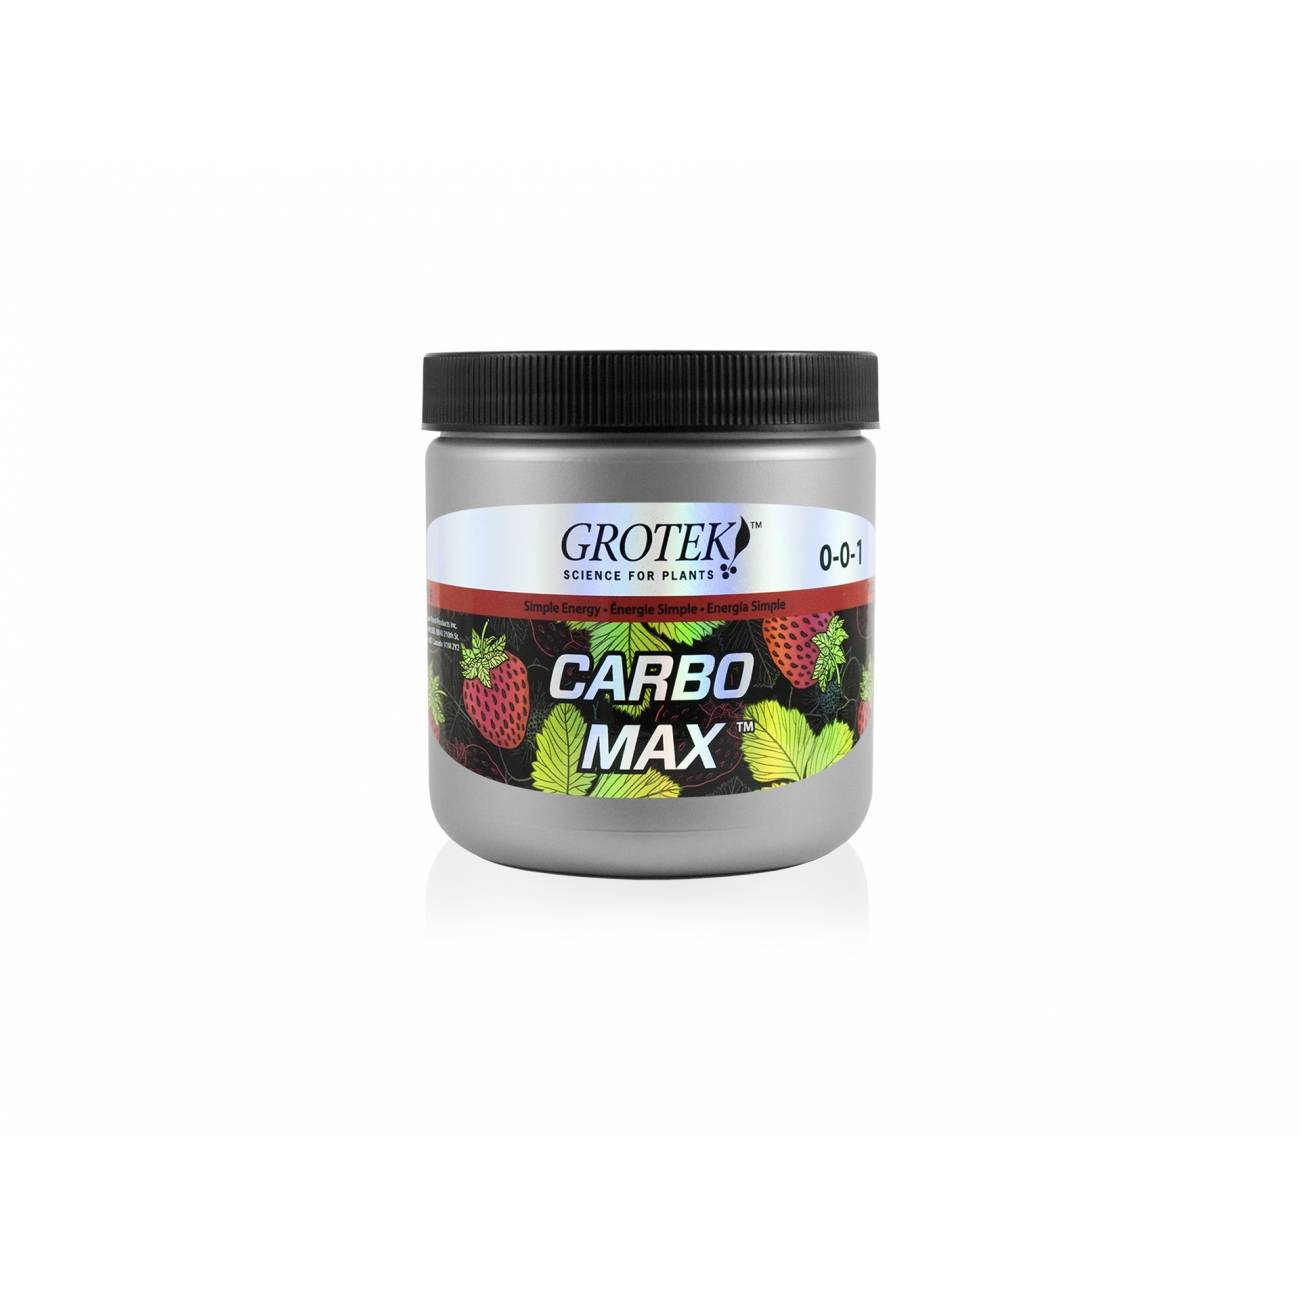 Carbo Max (100g/300g)